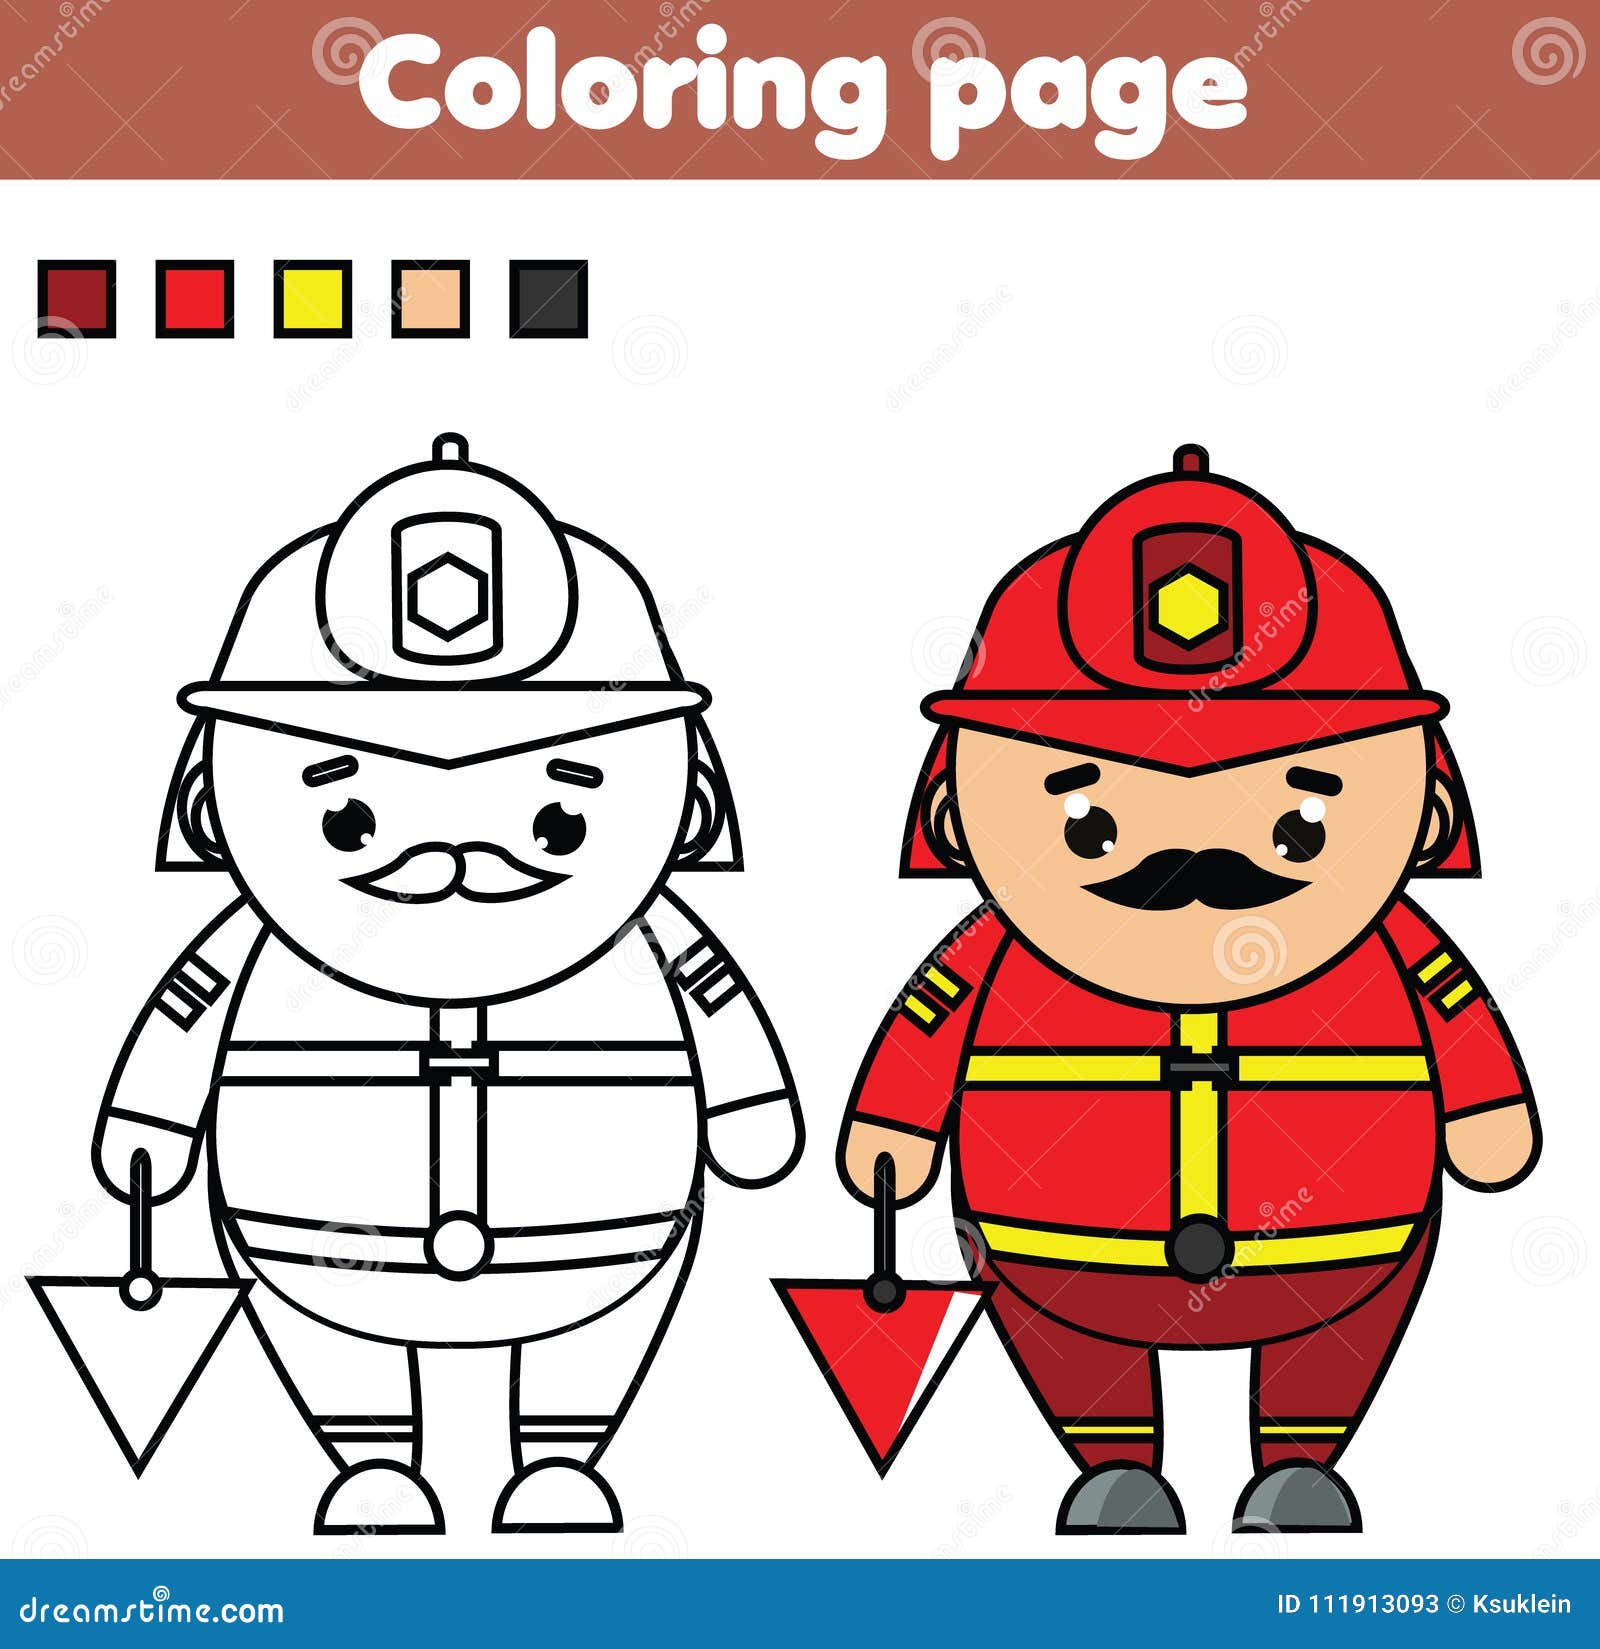 Fireman coloring page educational game printable activity for toddlers and kids stock vector